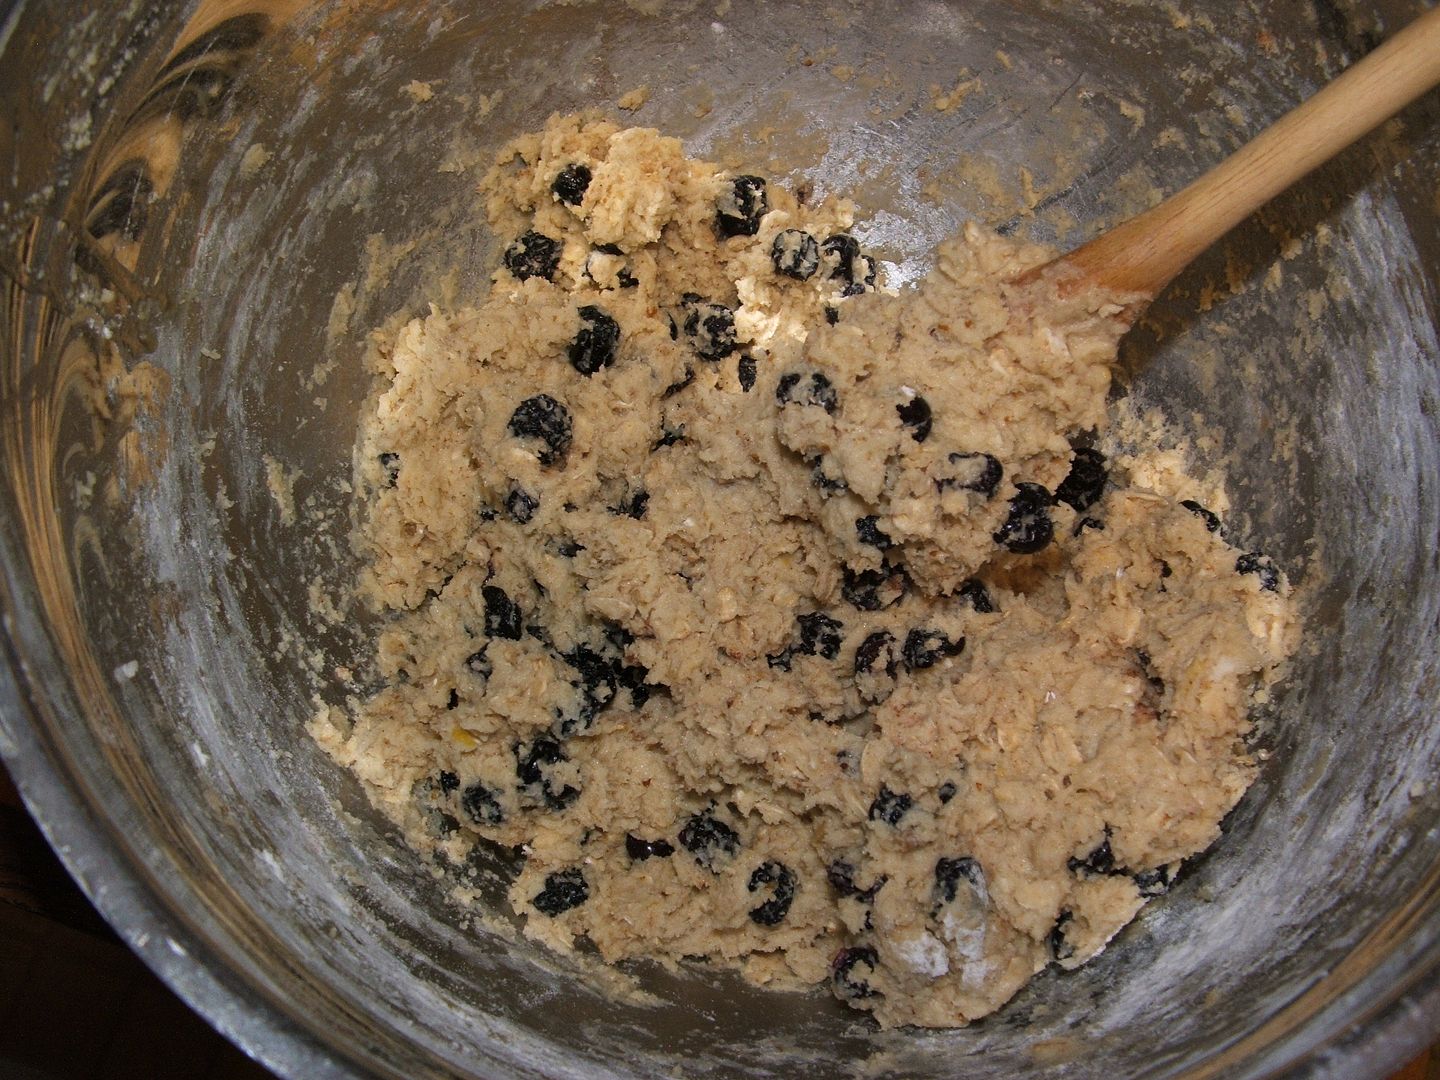 Lemon Blueberry Oatmeal Cookies by Angie Ouellette-Tower for godsgrowinggarden.com photo 001-4_zpsd250c76d.jpg